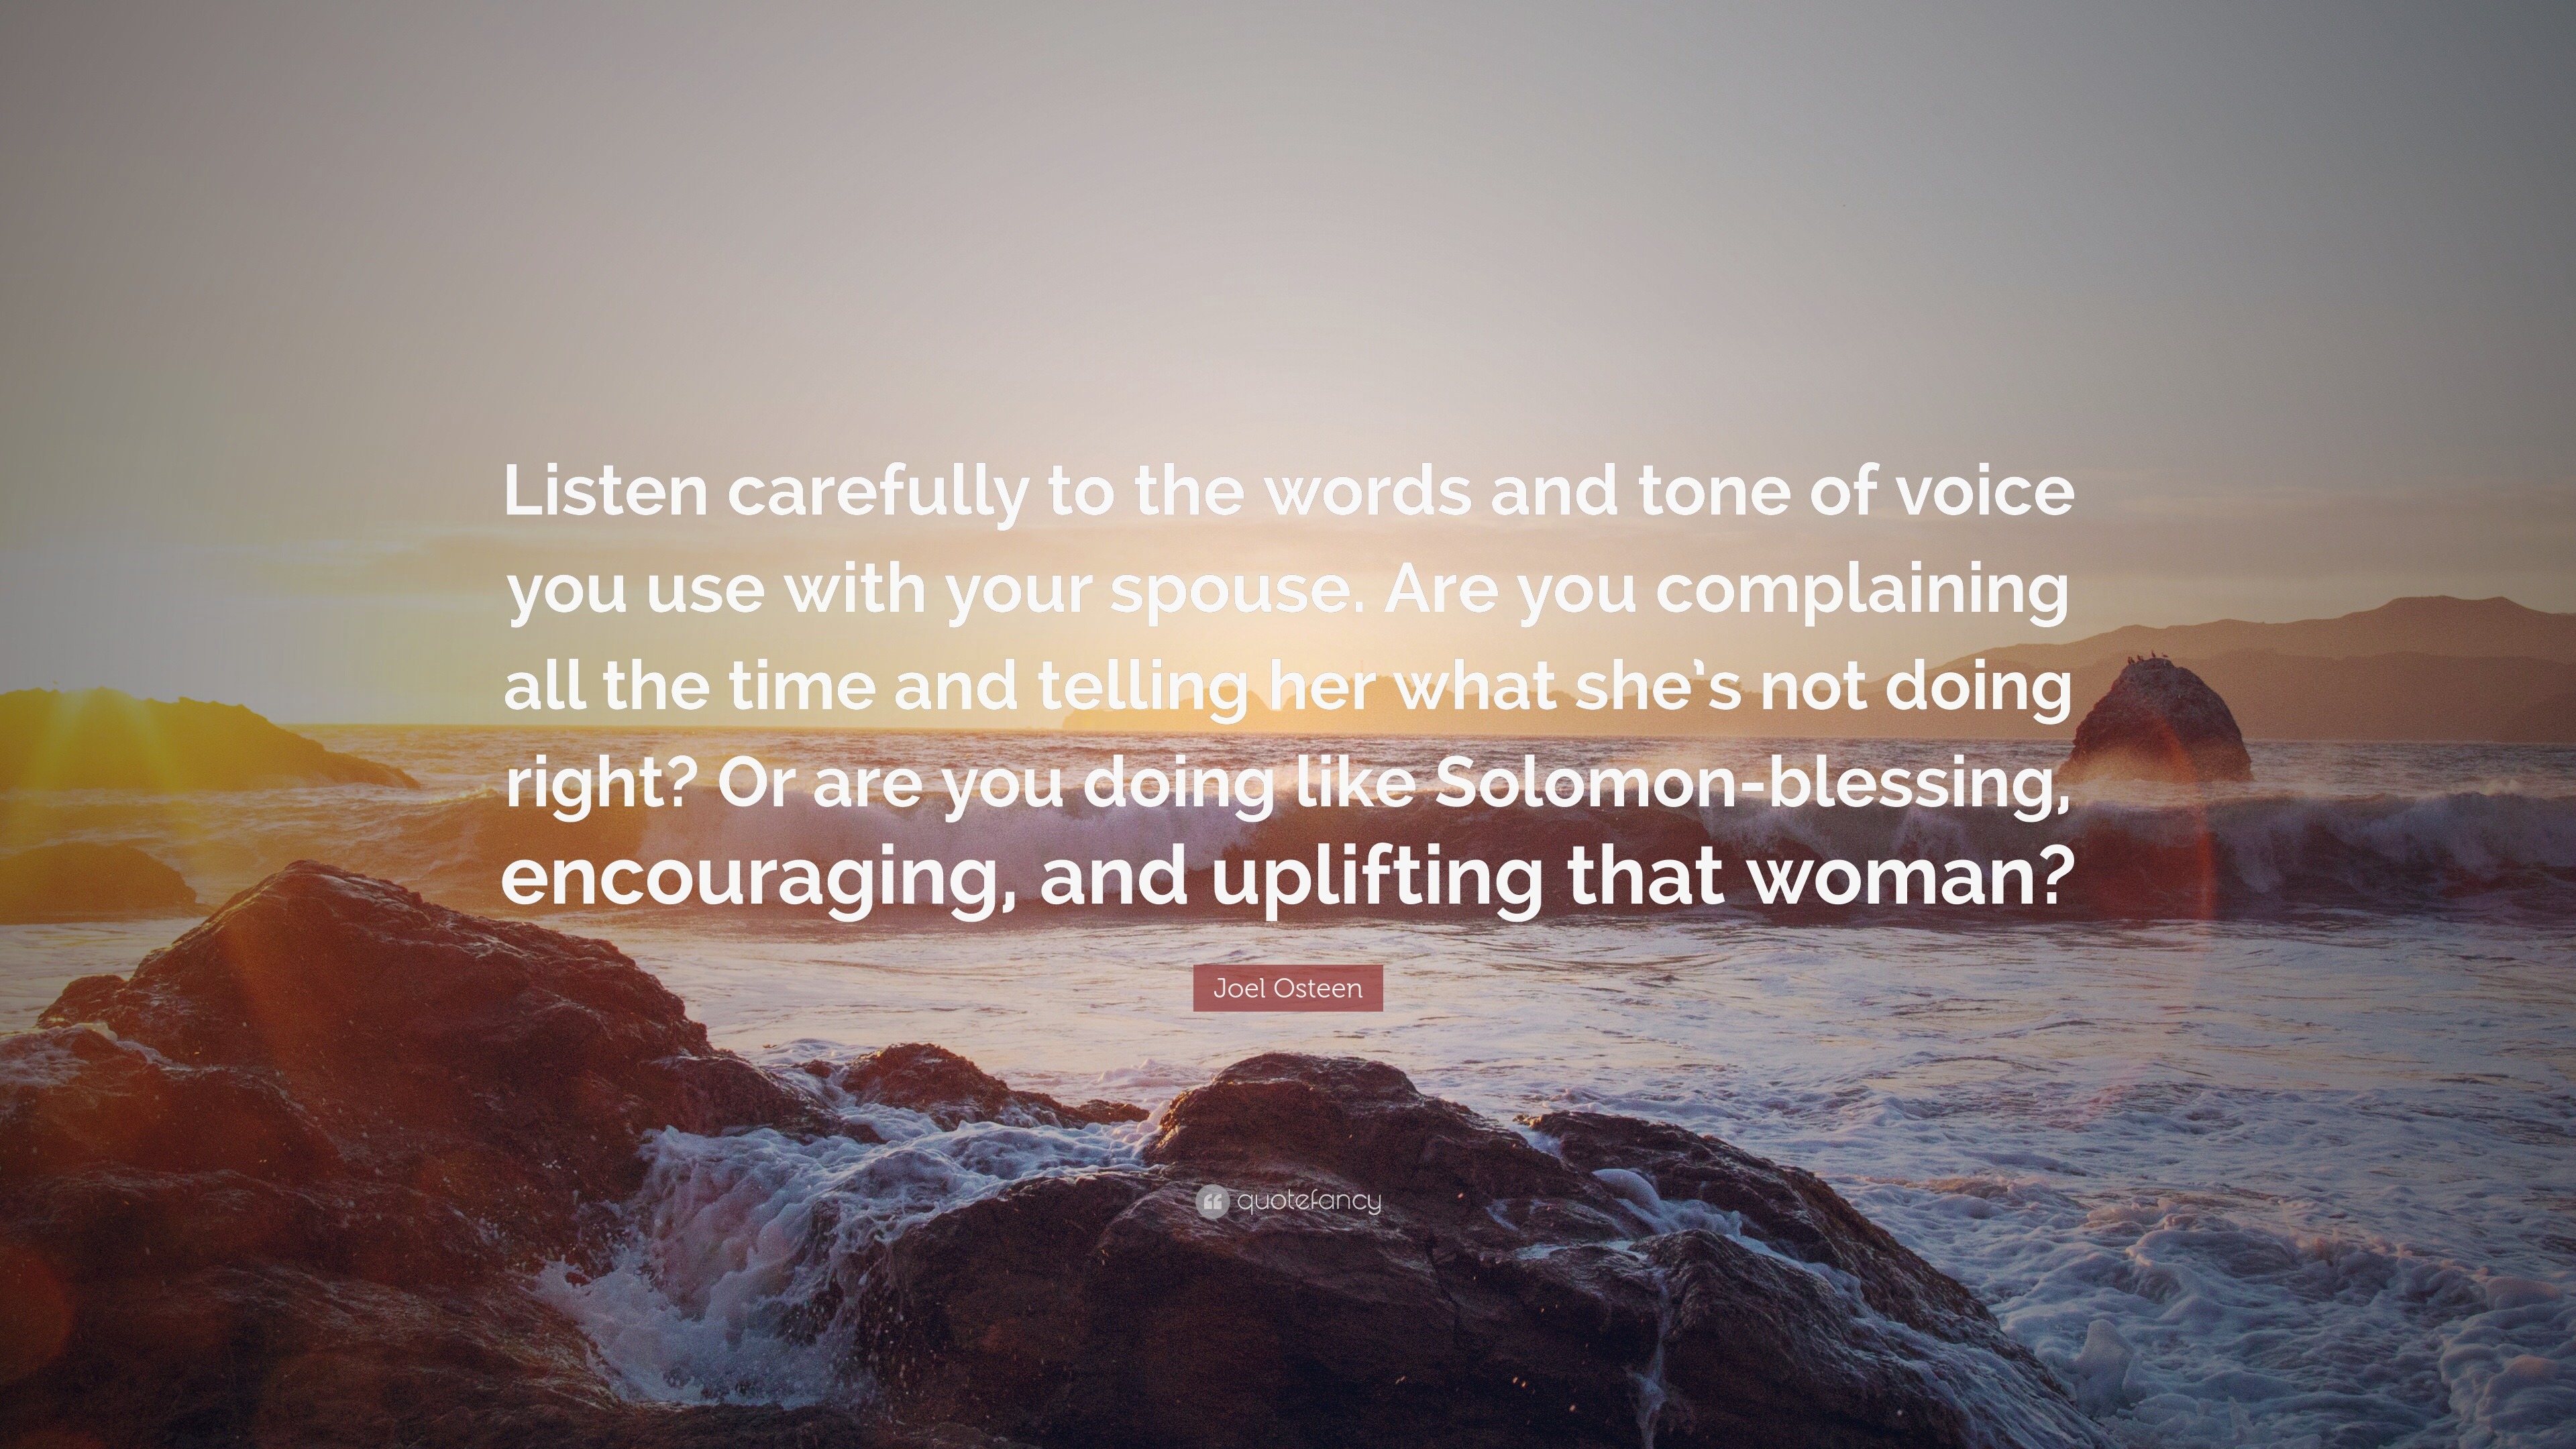 Joel Osteen Quote: “Listen carefully to the words and tone of voice you ...